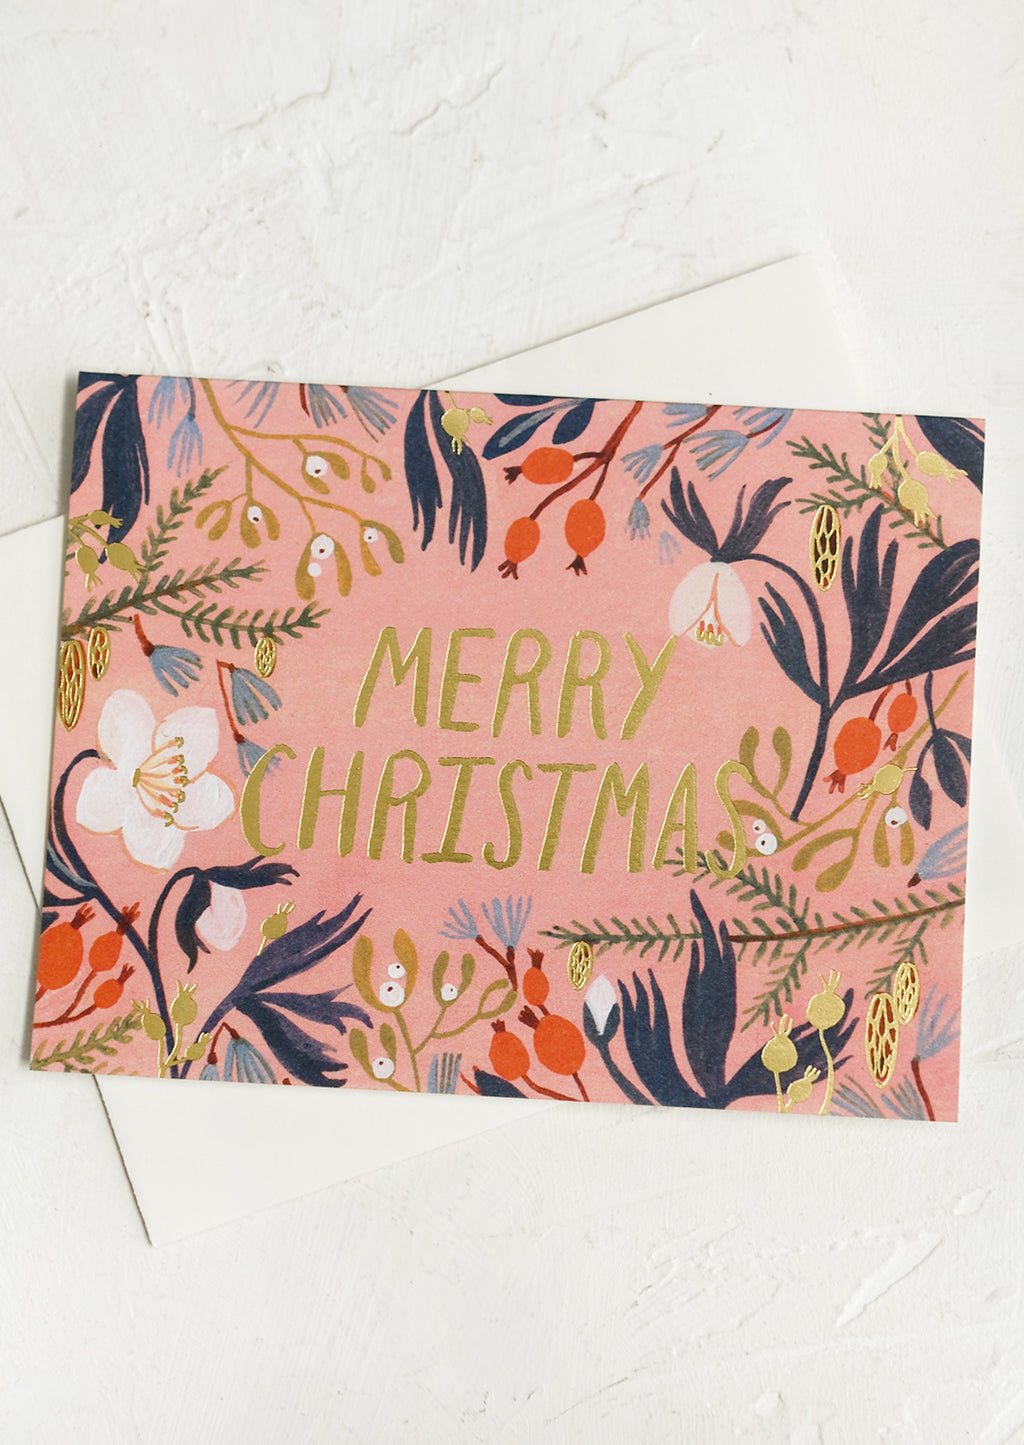 2: A set of pink floral print cards reading "Merry christmas".